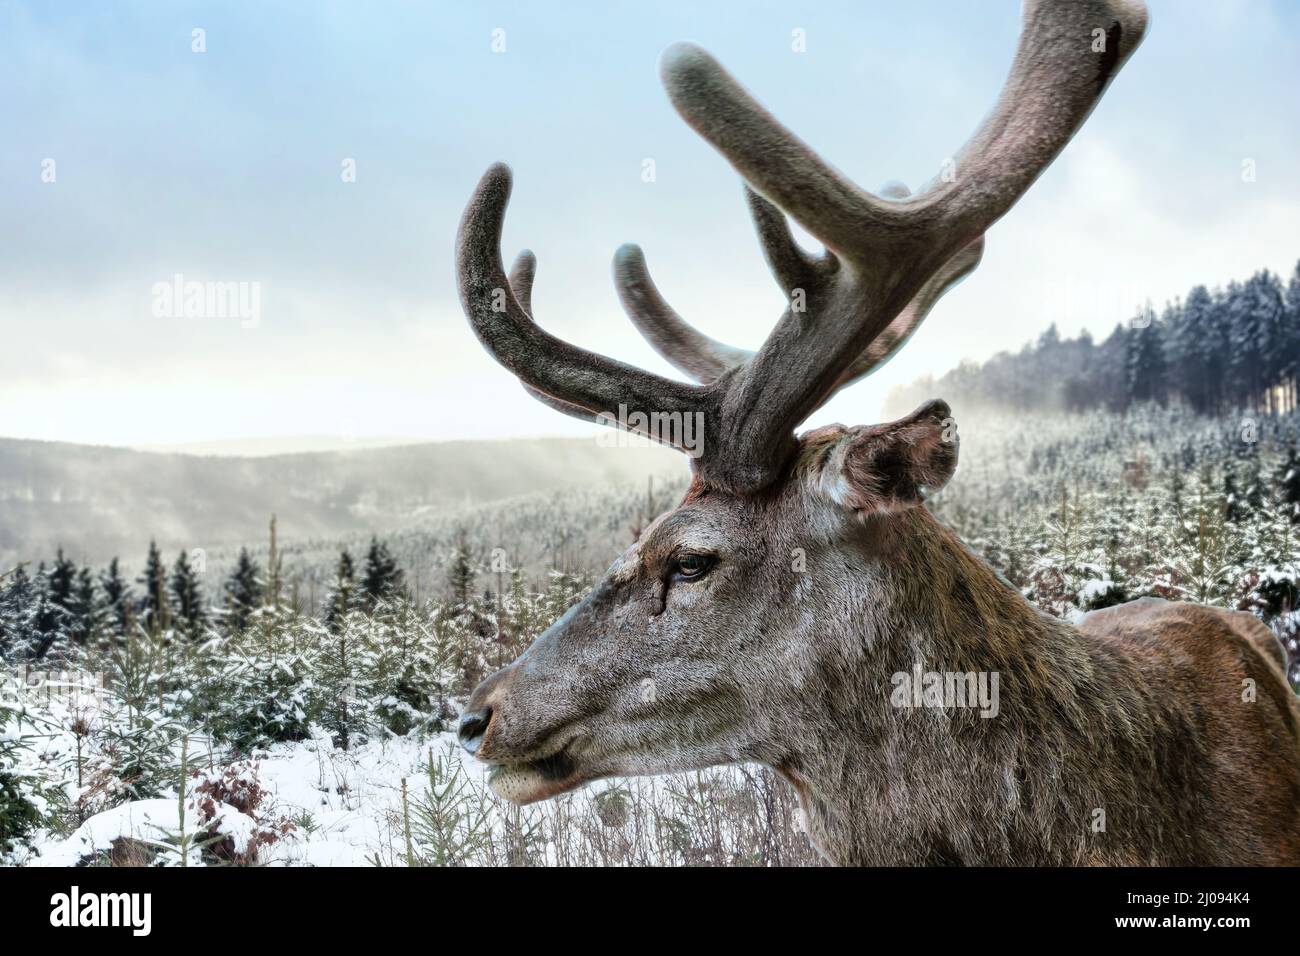 A stag with imposing antlers stands in front of a forest landscape in winter. Stock Photo